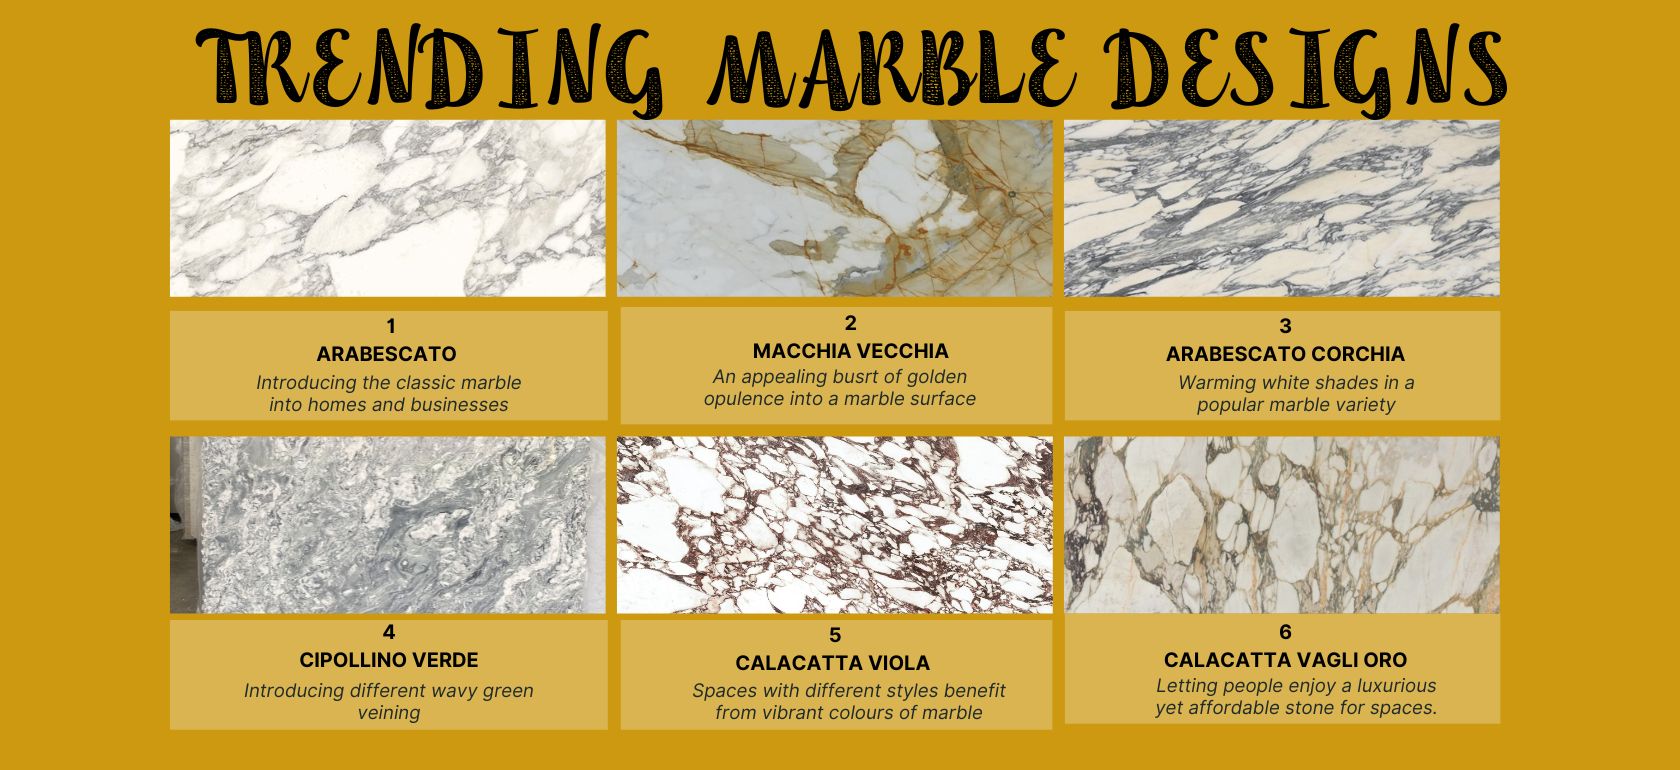 6 Trending Marble Designs for Stunning Homes and Businesse